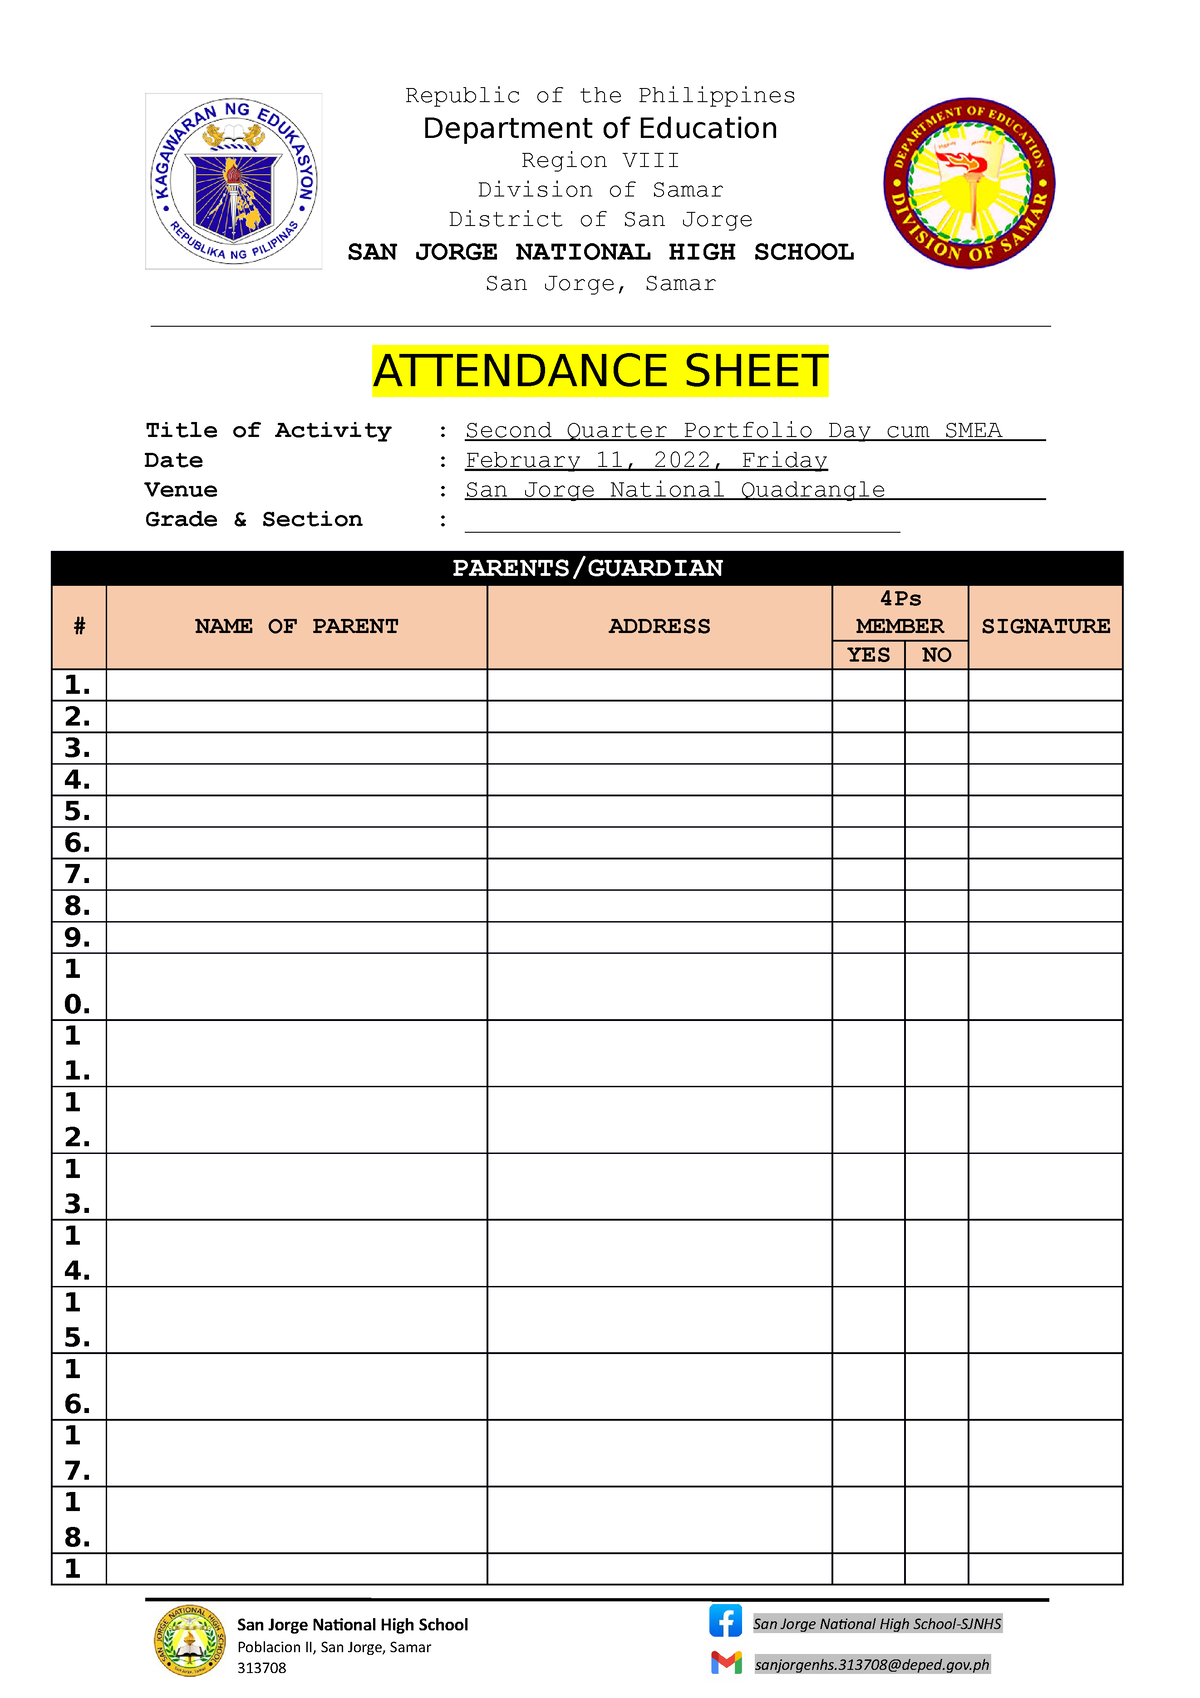 Attendance Sheet For Quarter 2 Portfolio Day Republic Of The Philippines Department Of 0488